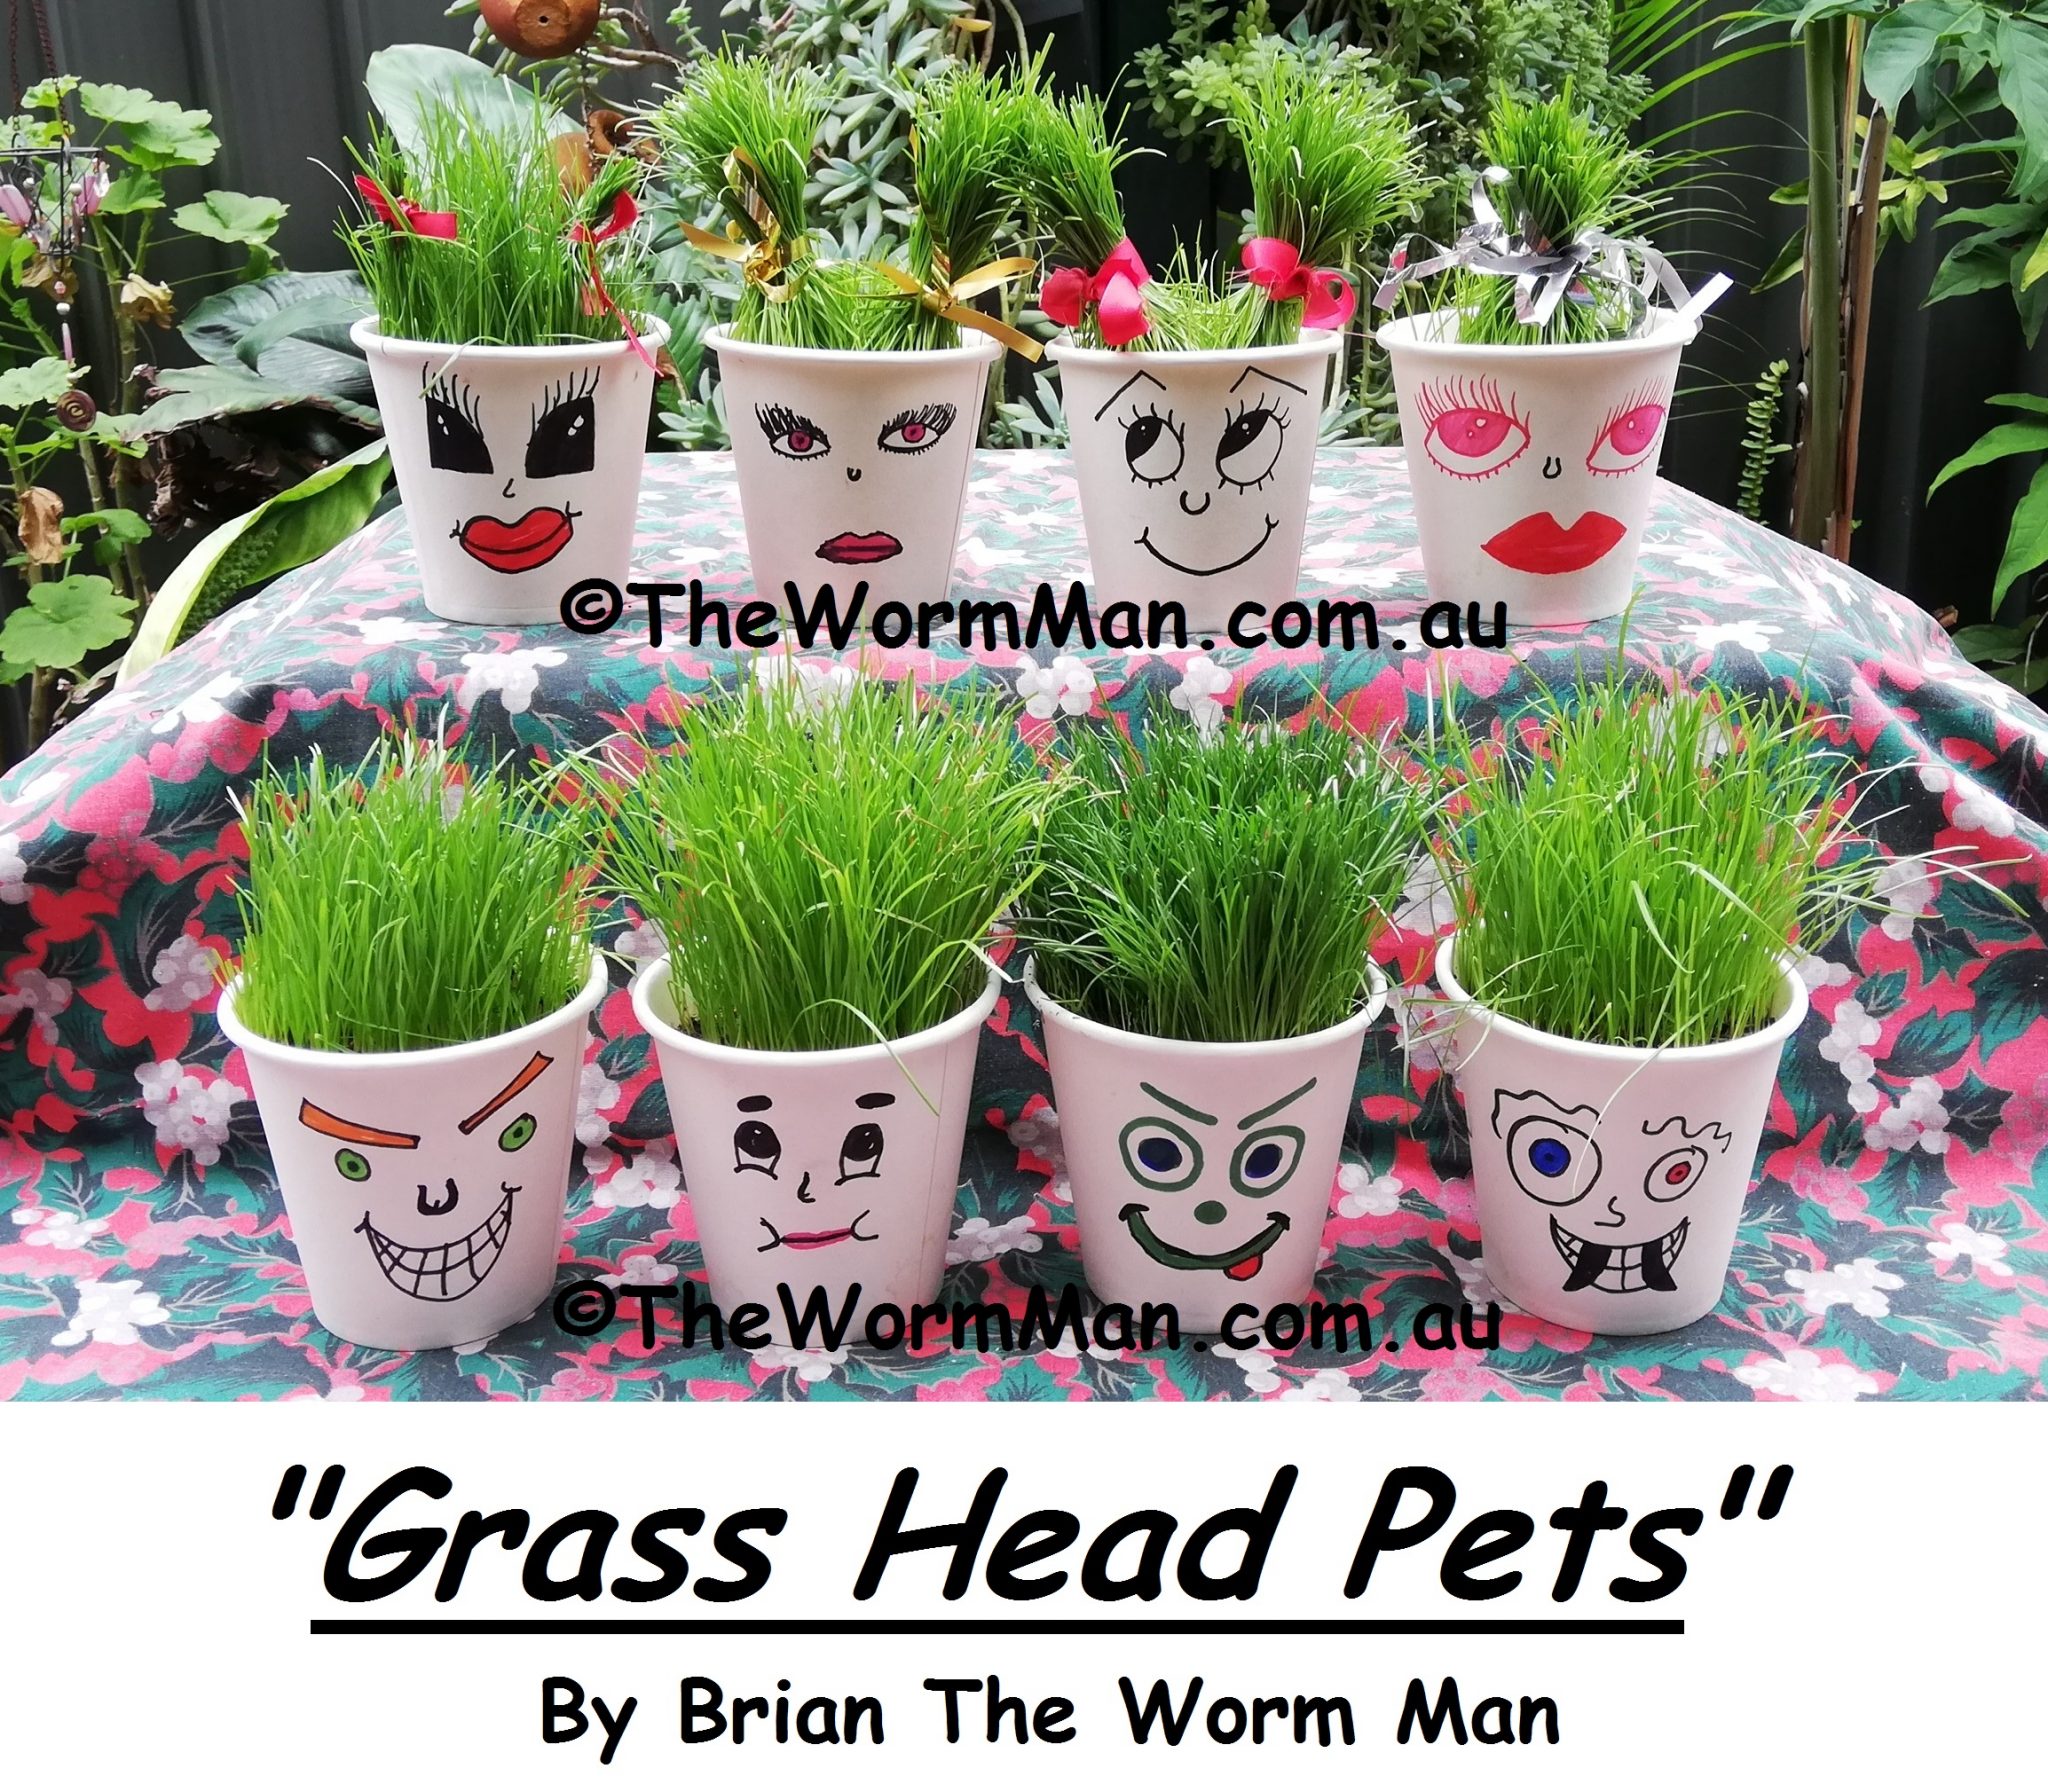 Grass Head Pets Kids Activity - With Brian The Worm Man